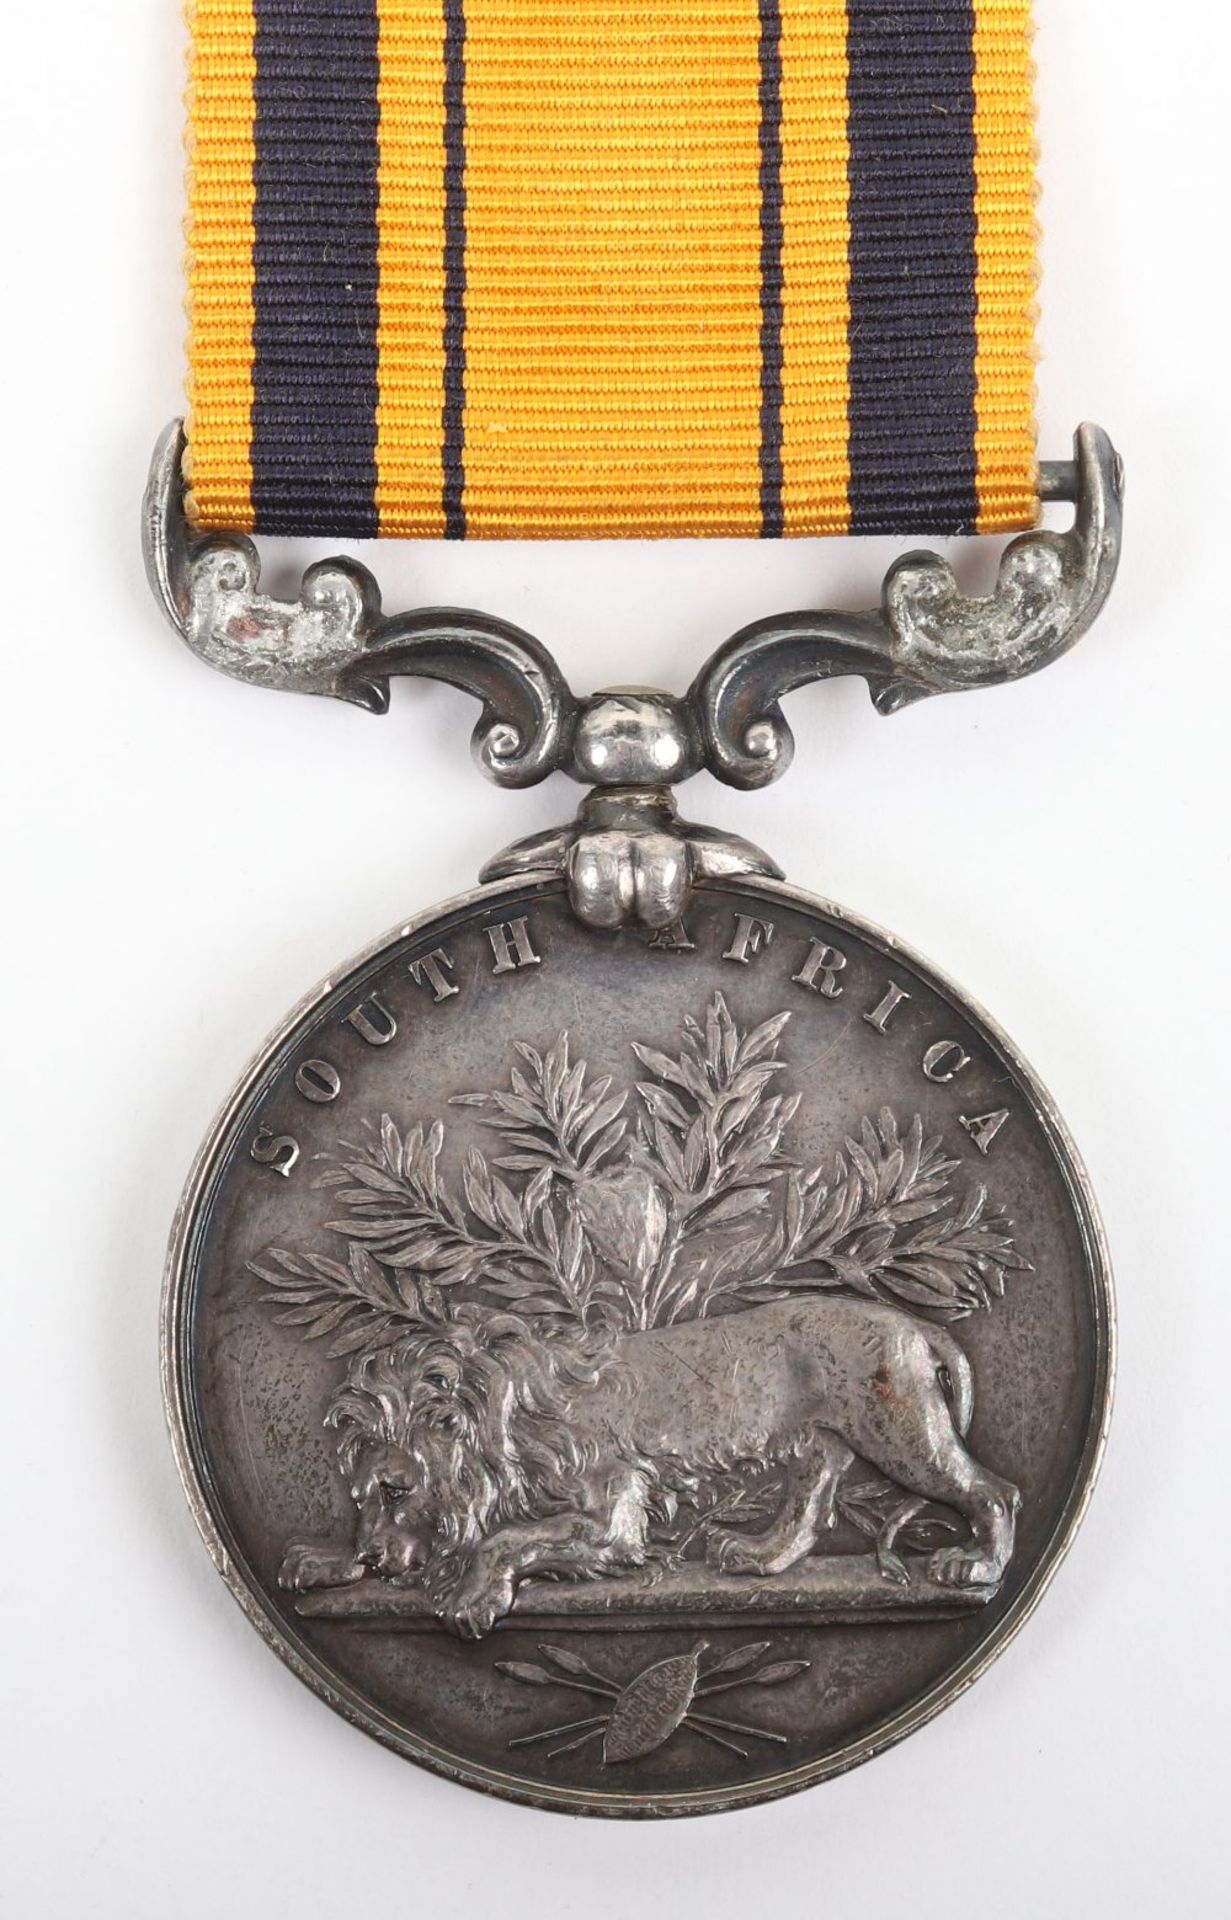 South Africa Medal 1877-79 7th Brigade Royal Artillery - Image 3 of 3